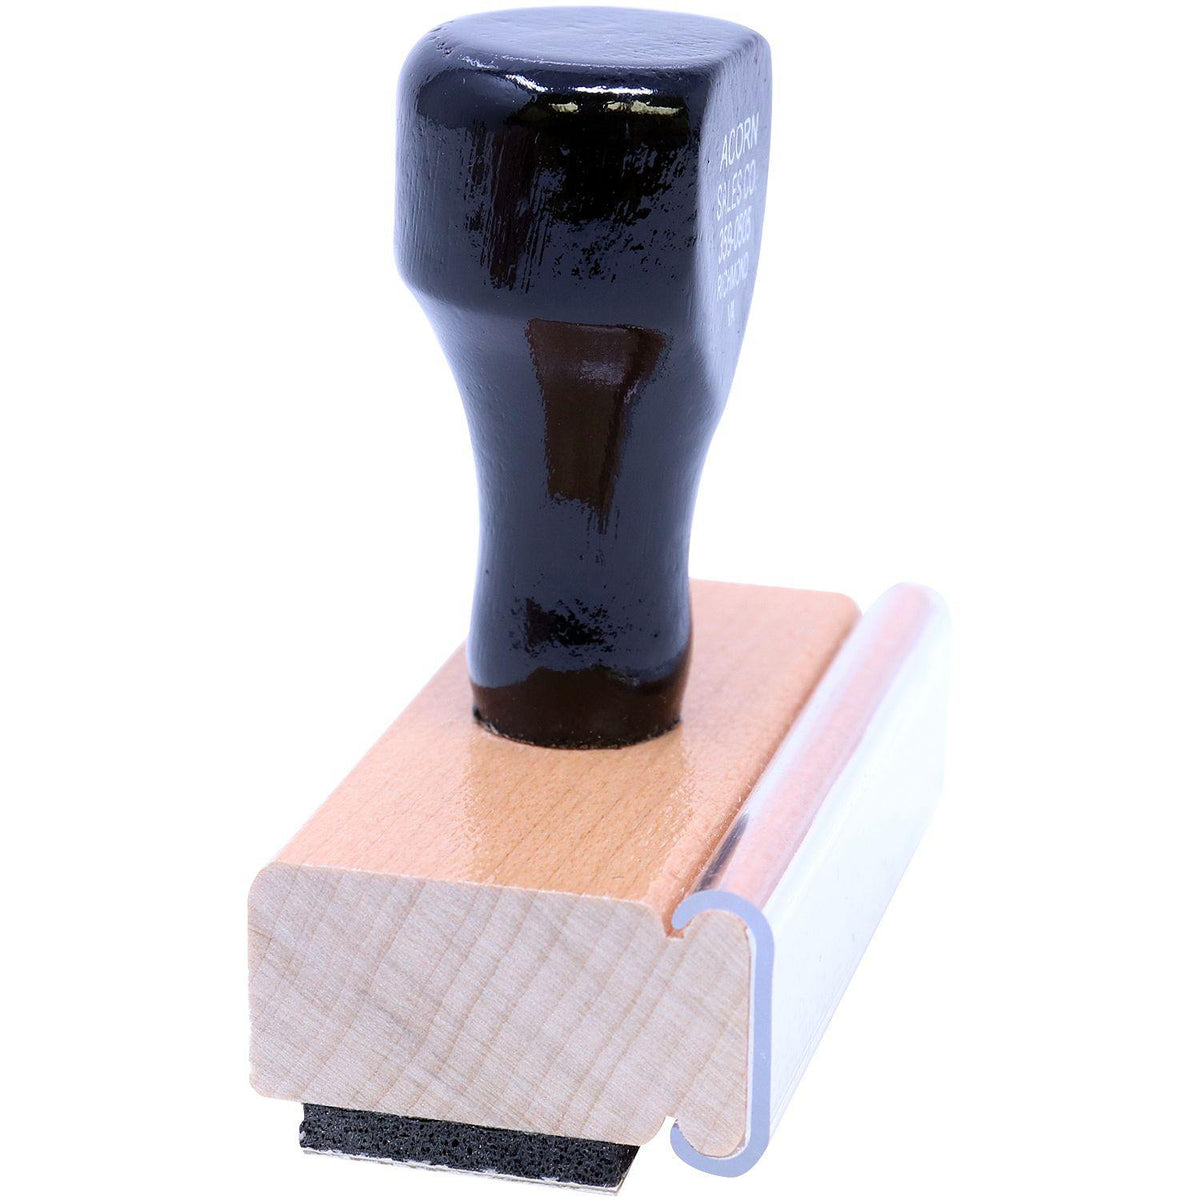 Posted Rubber Stamp - Engineer Seal Stamps - Brand_Acorn, Impression Size_Small, Stamp Type_Regular Stamp, Type of Use_Office